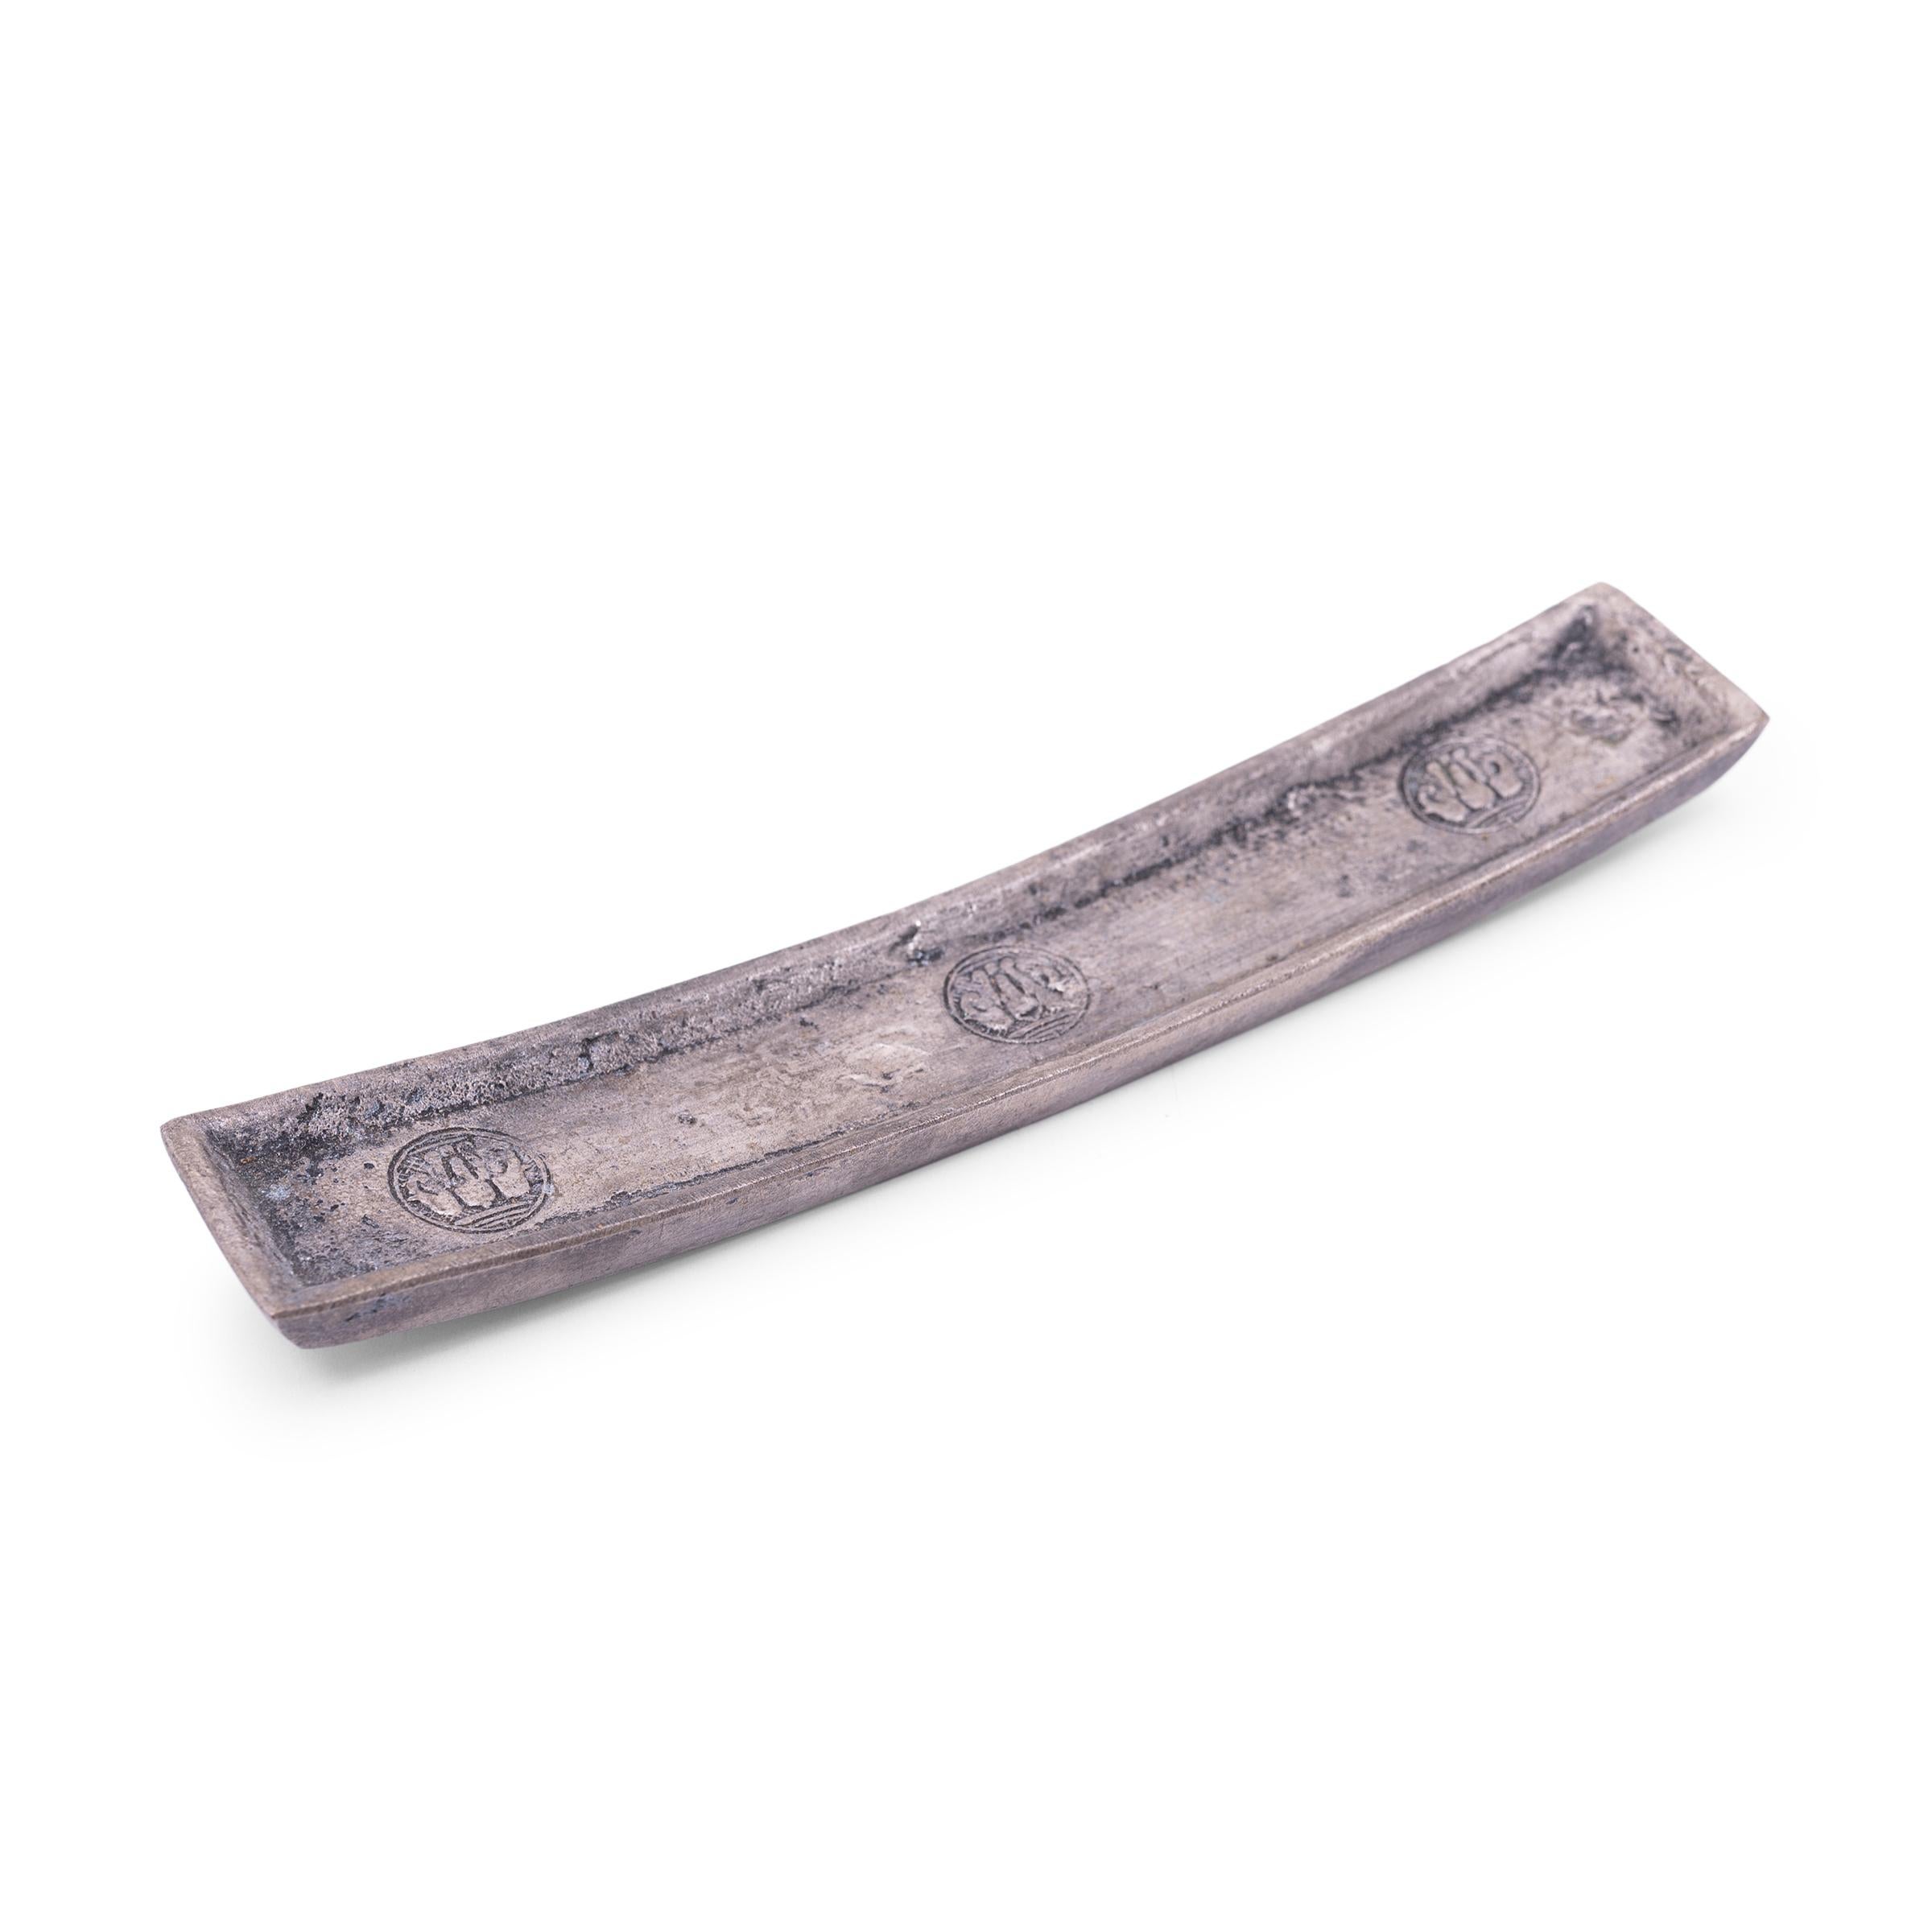 This silver alloy ingot is cast in the form of an elongated bar, with a slender, rectangular shape and curved ends. Resembling a shallow dish or incense stand, the ingot has a concave surface stamped with three round medallions of a three-headed